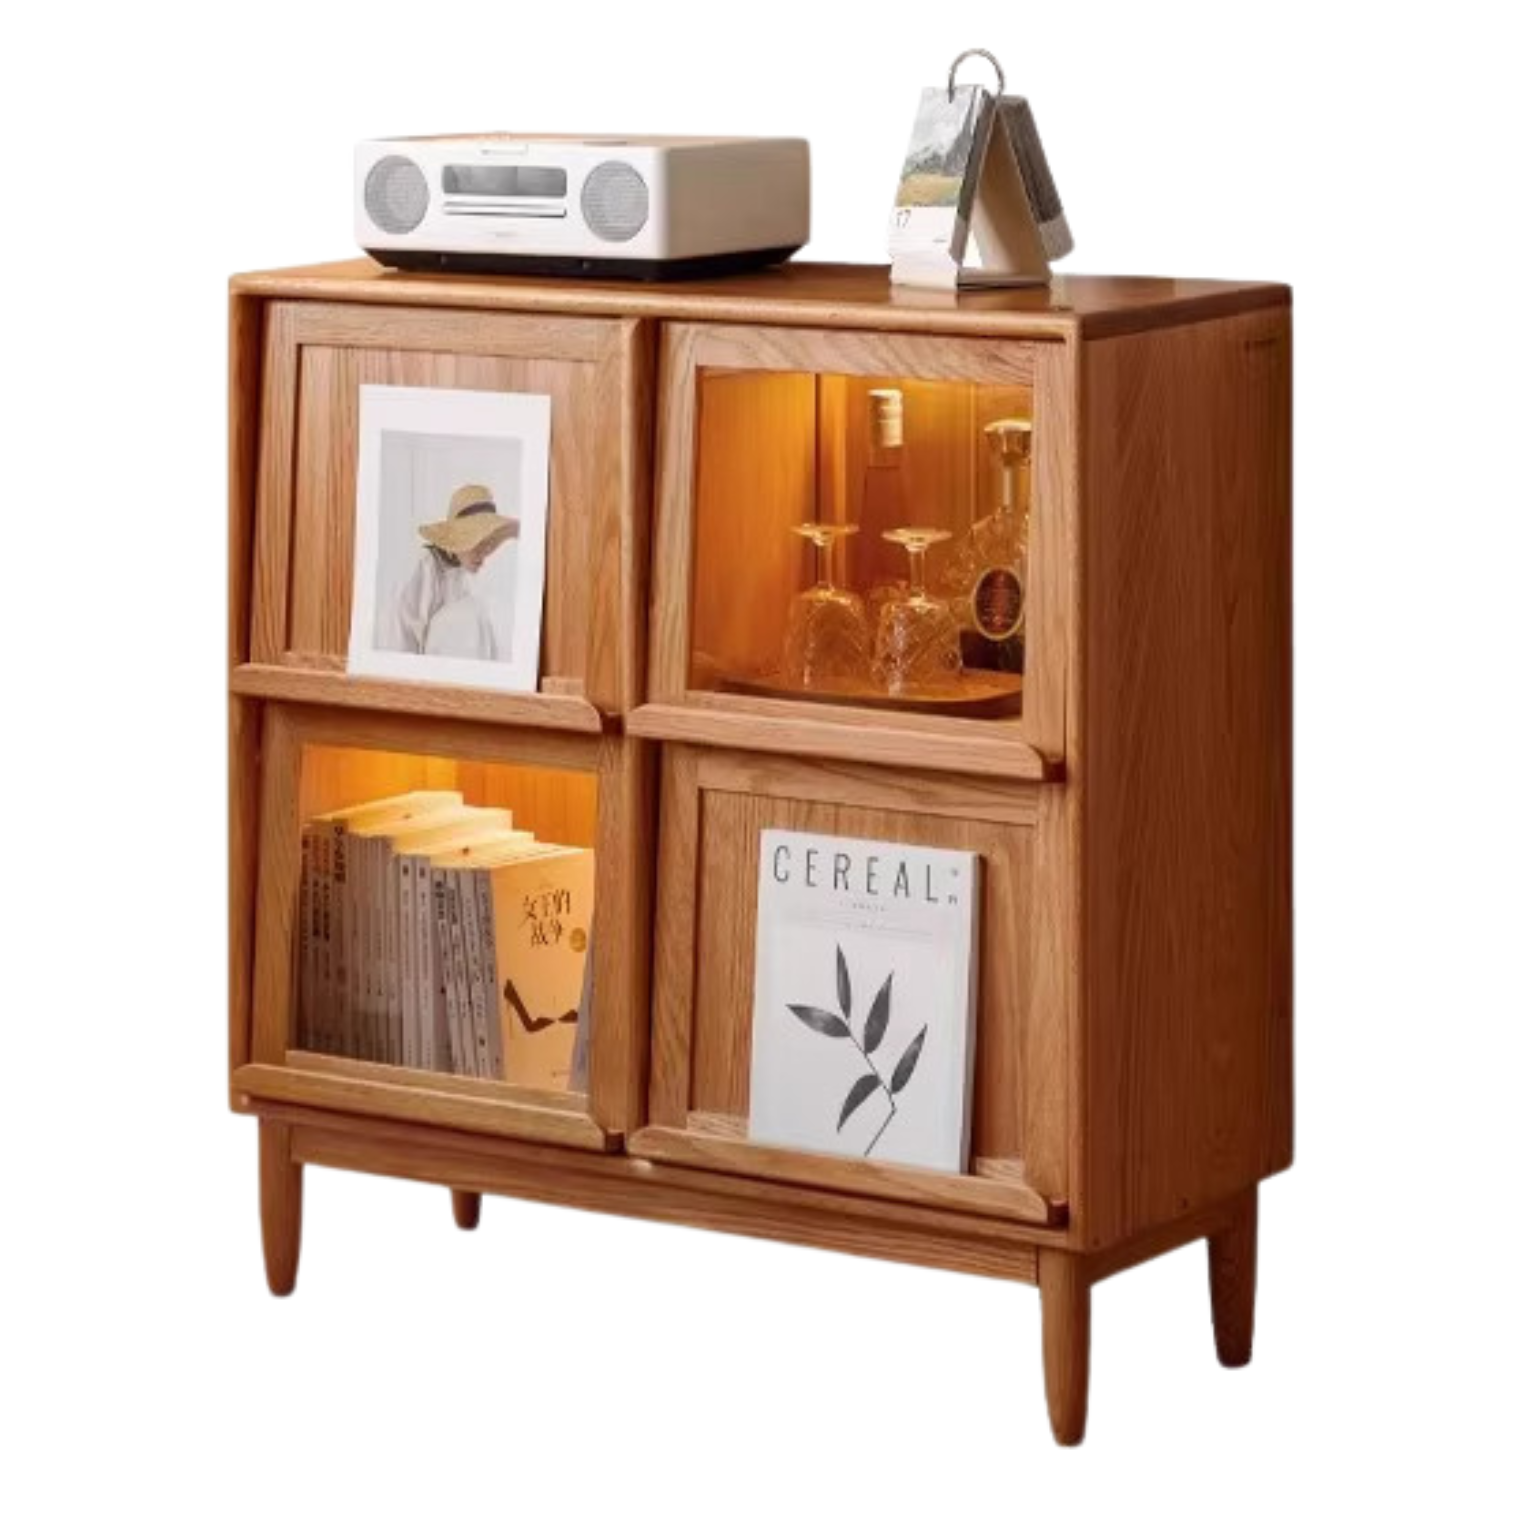 Сherry solid wood Four-door bookcase with light, magazine cabinet -